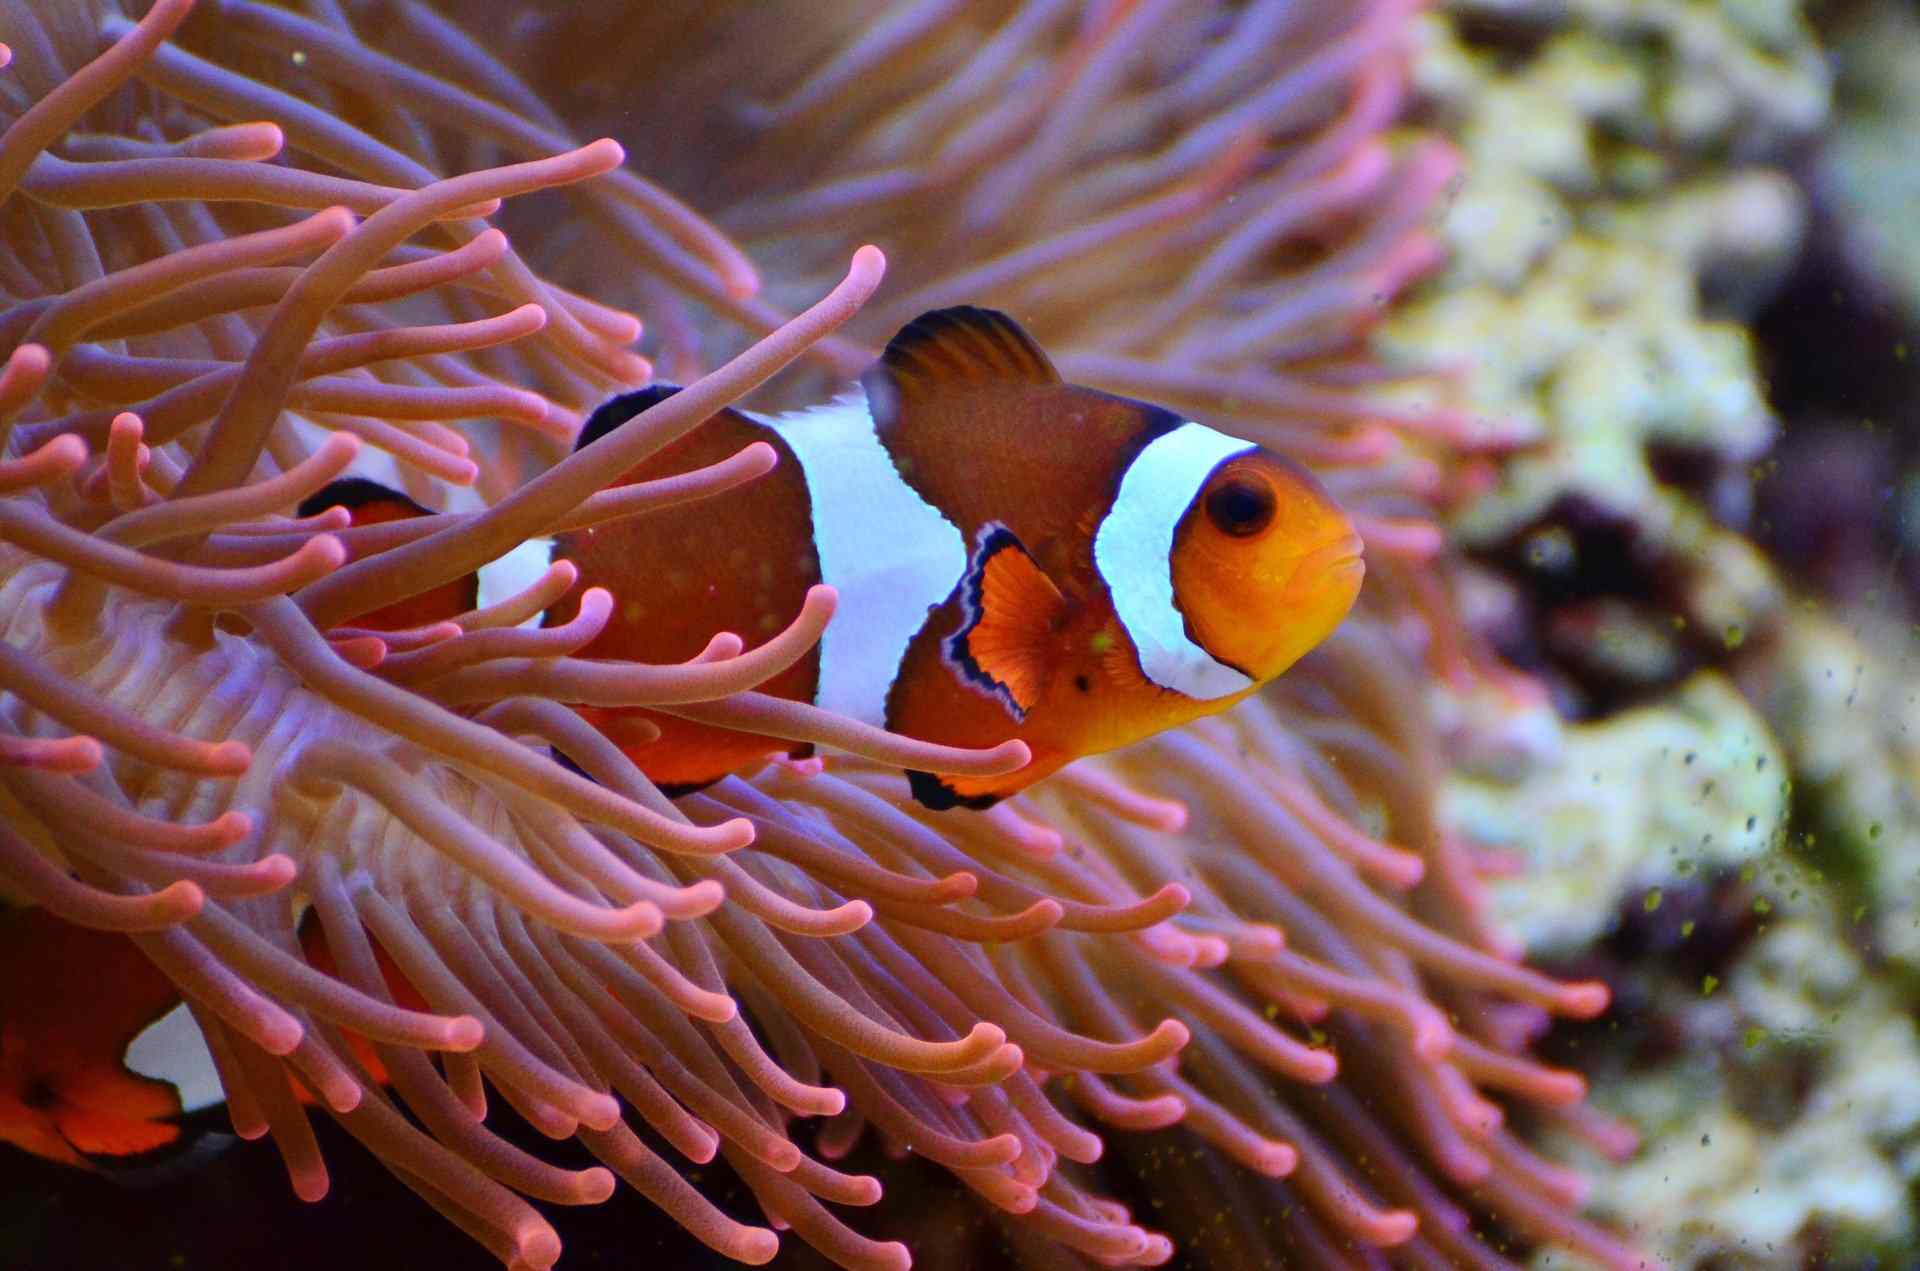 You are currently viewing Relationship between anemonefish and sea anemones